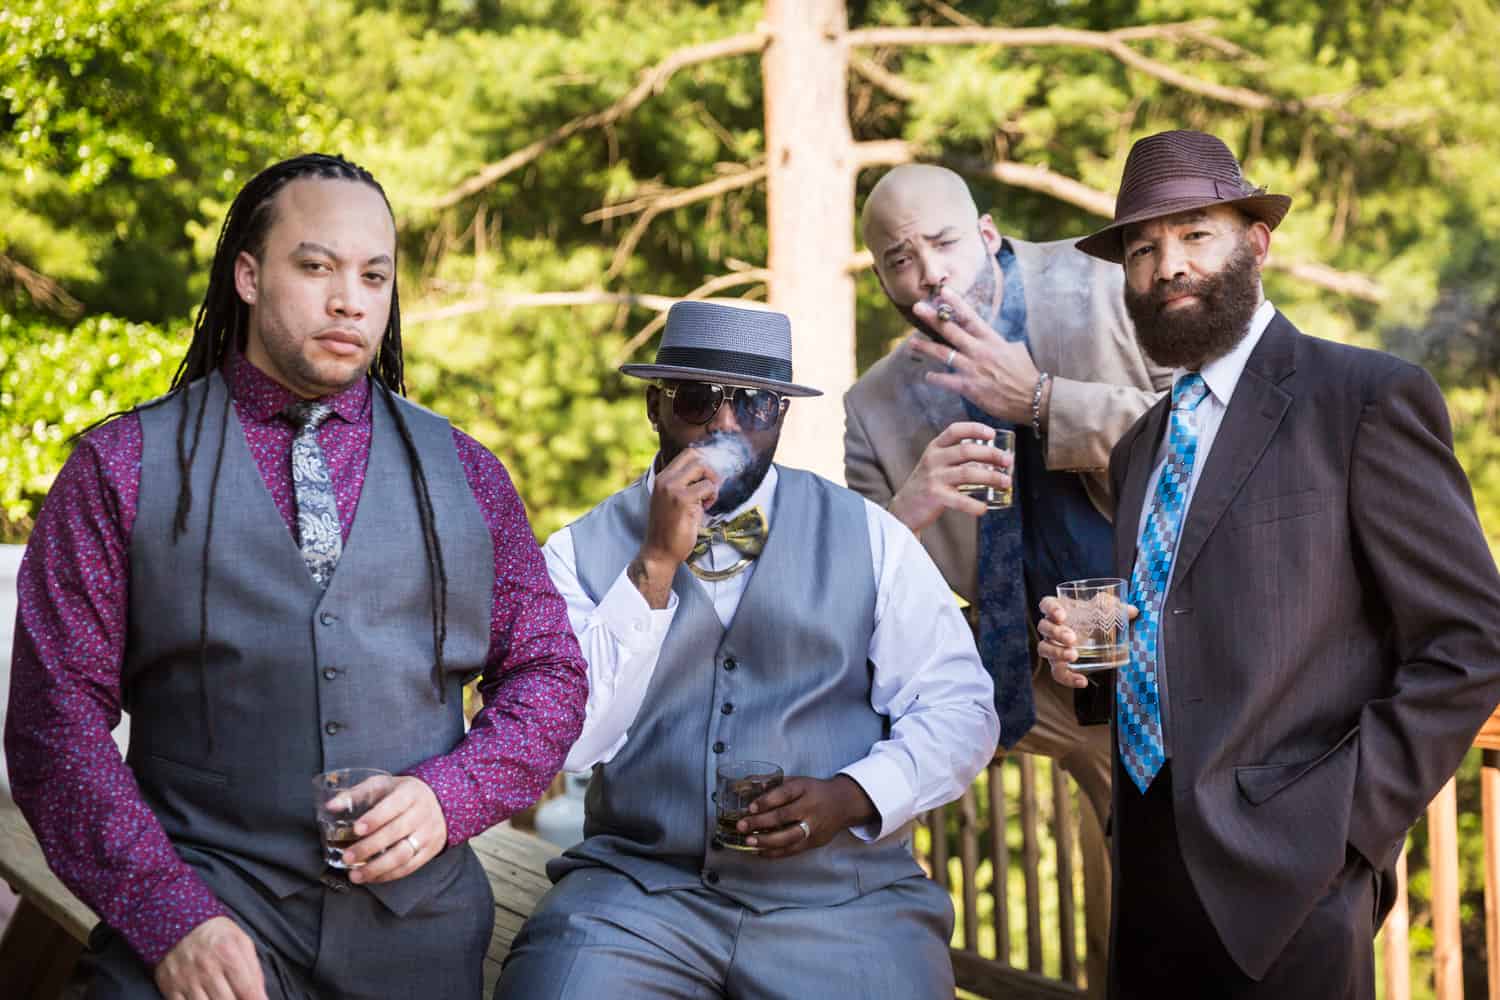 Male family members smoking together on porch during a family reunion portrait